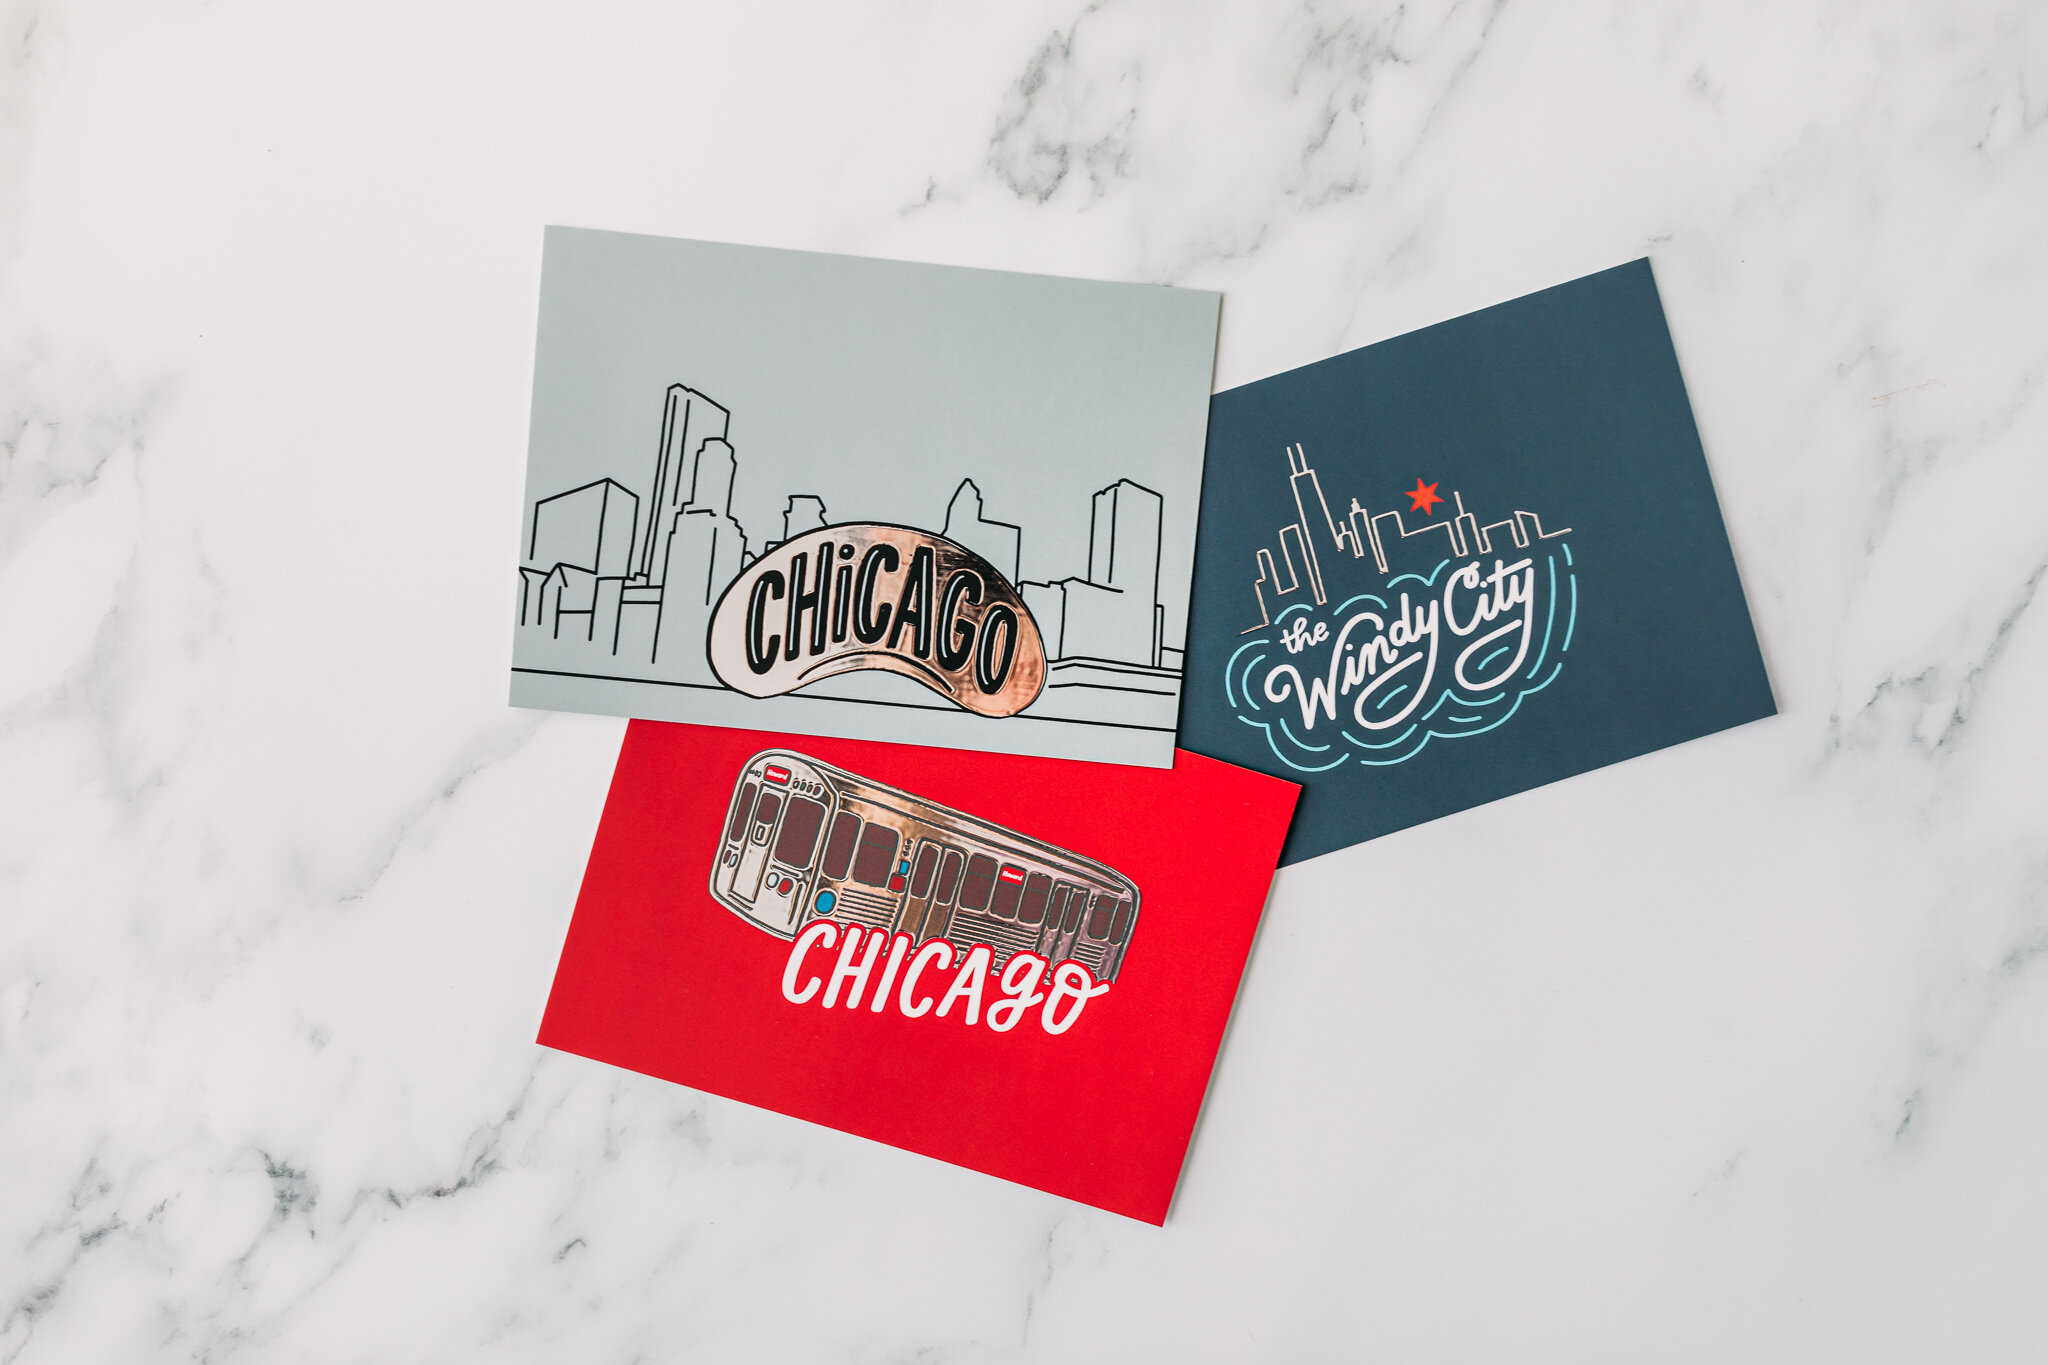 Hand-Lettered Chicago Foil Art Prints Art Prints from Chicago IL Local Chicago Artist Made Windy City Prints Chicago Design Prints